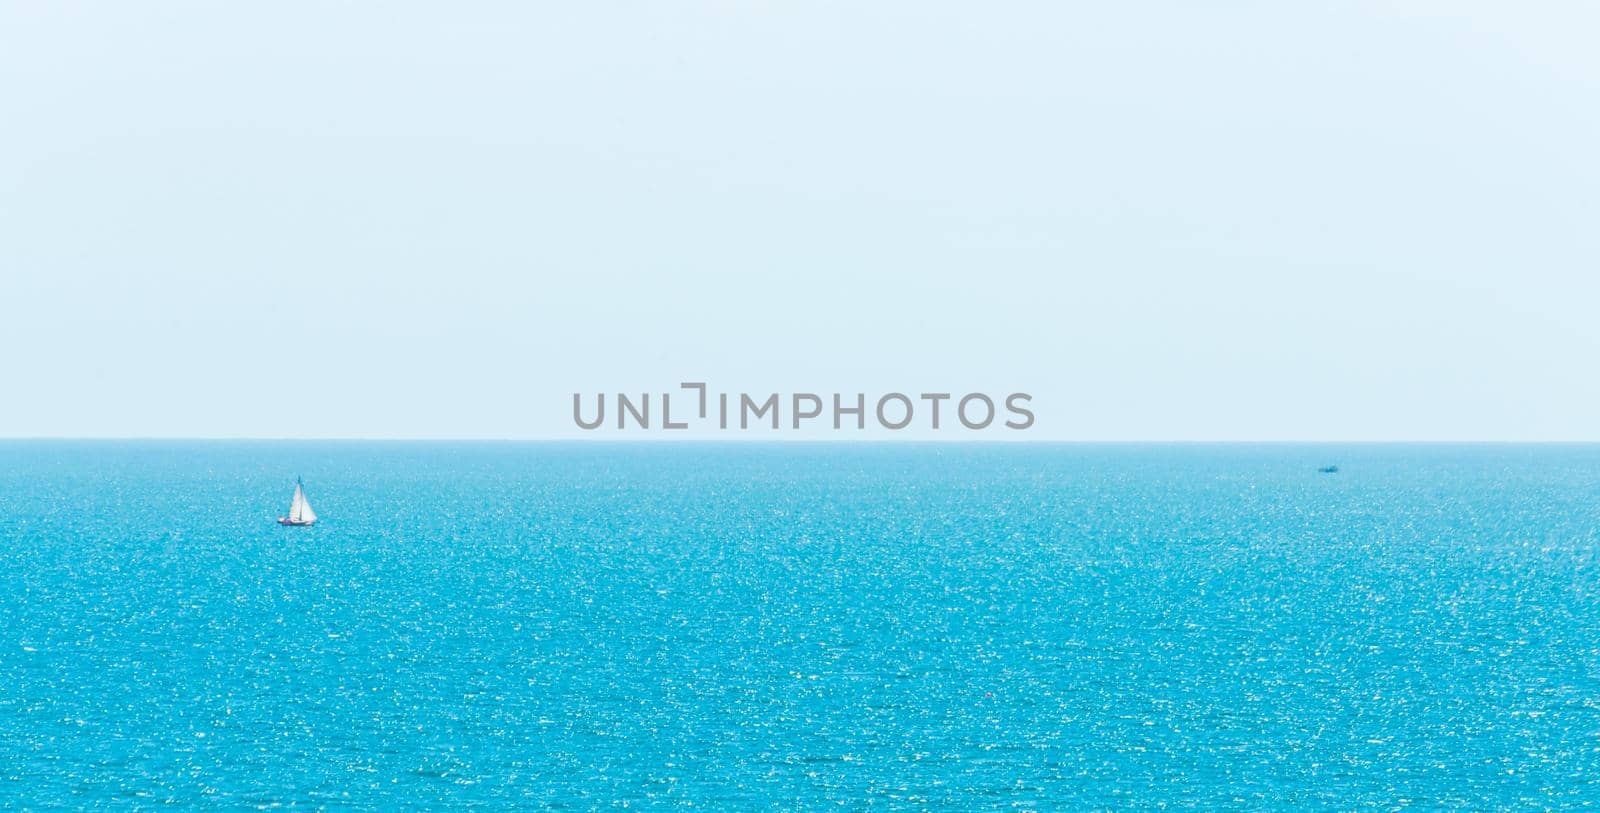 Ocean infinity, yacht sailing the ocean, clear sky, blue water by Q77photo